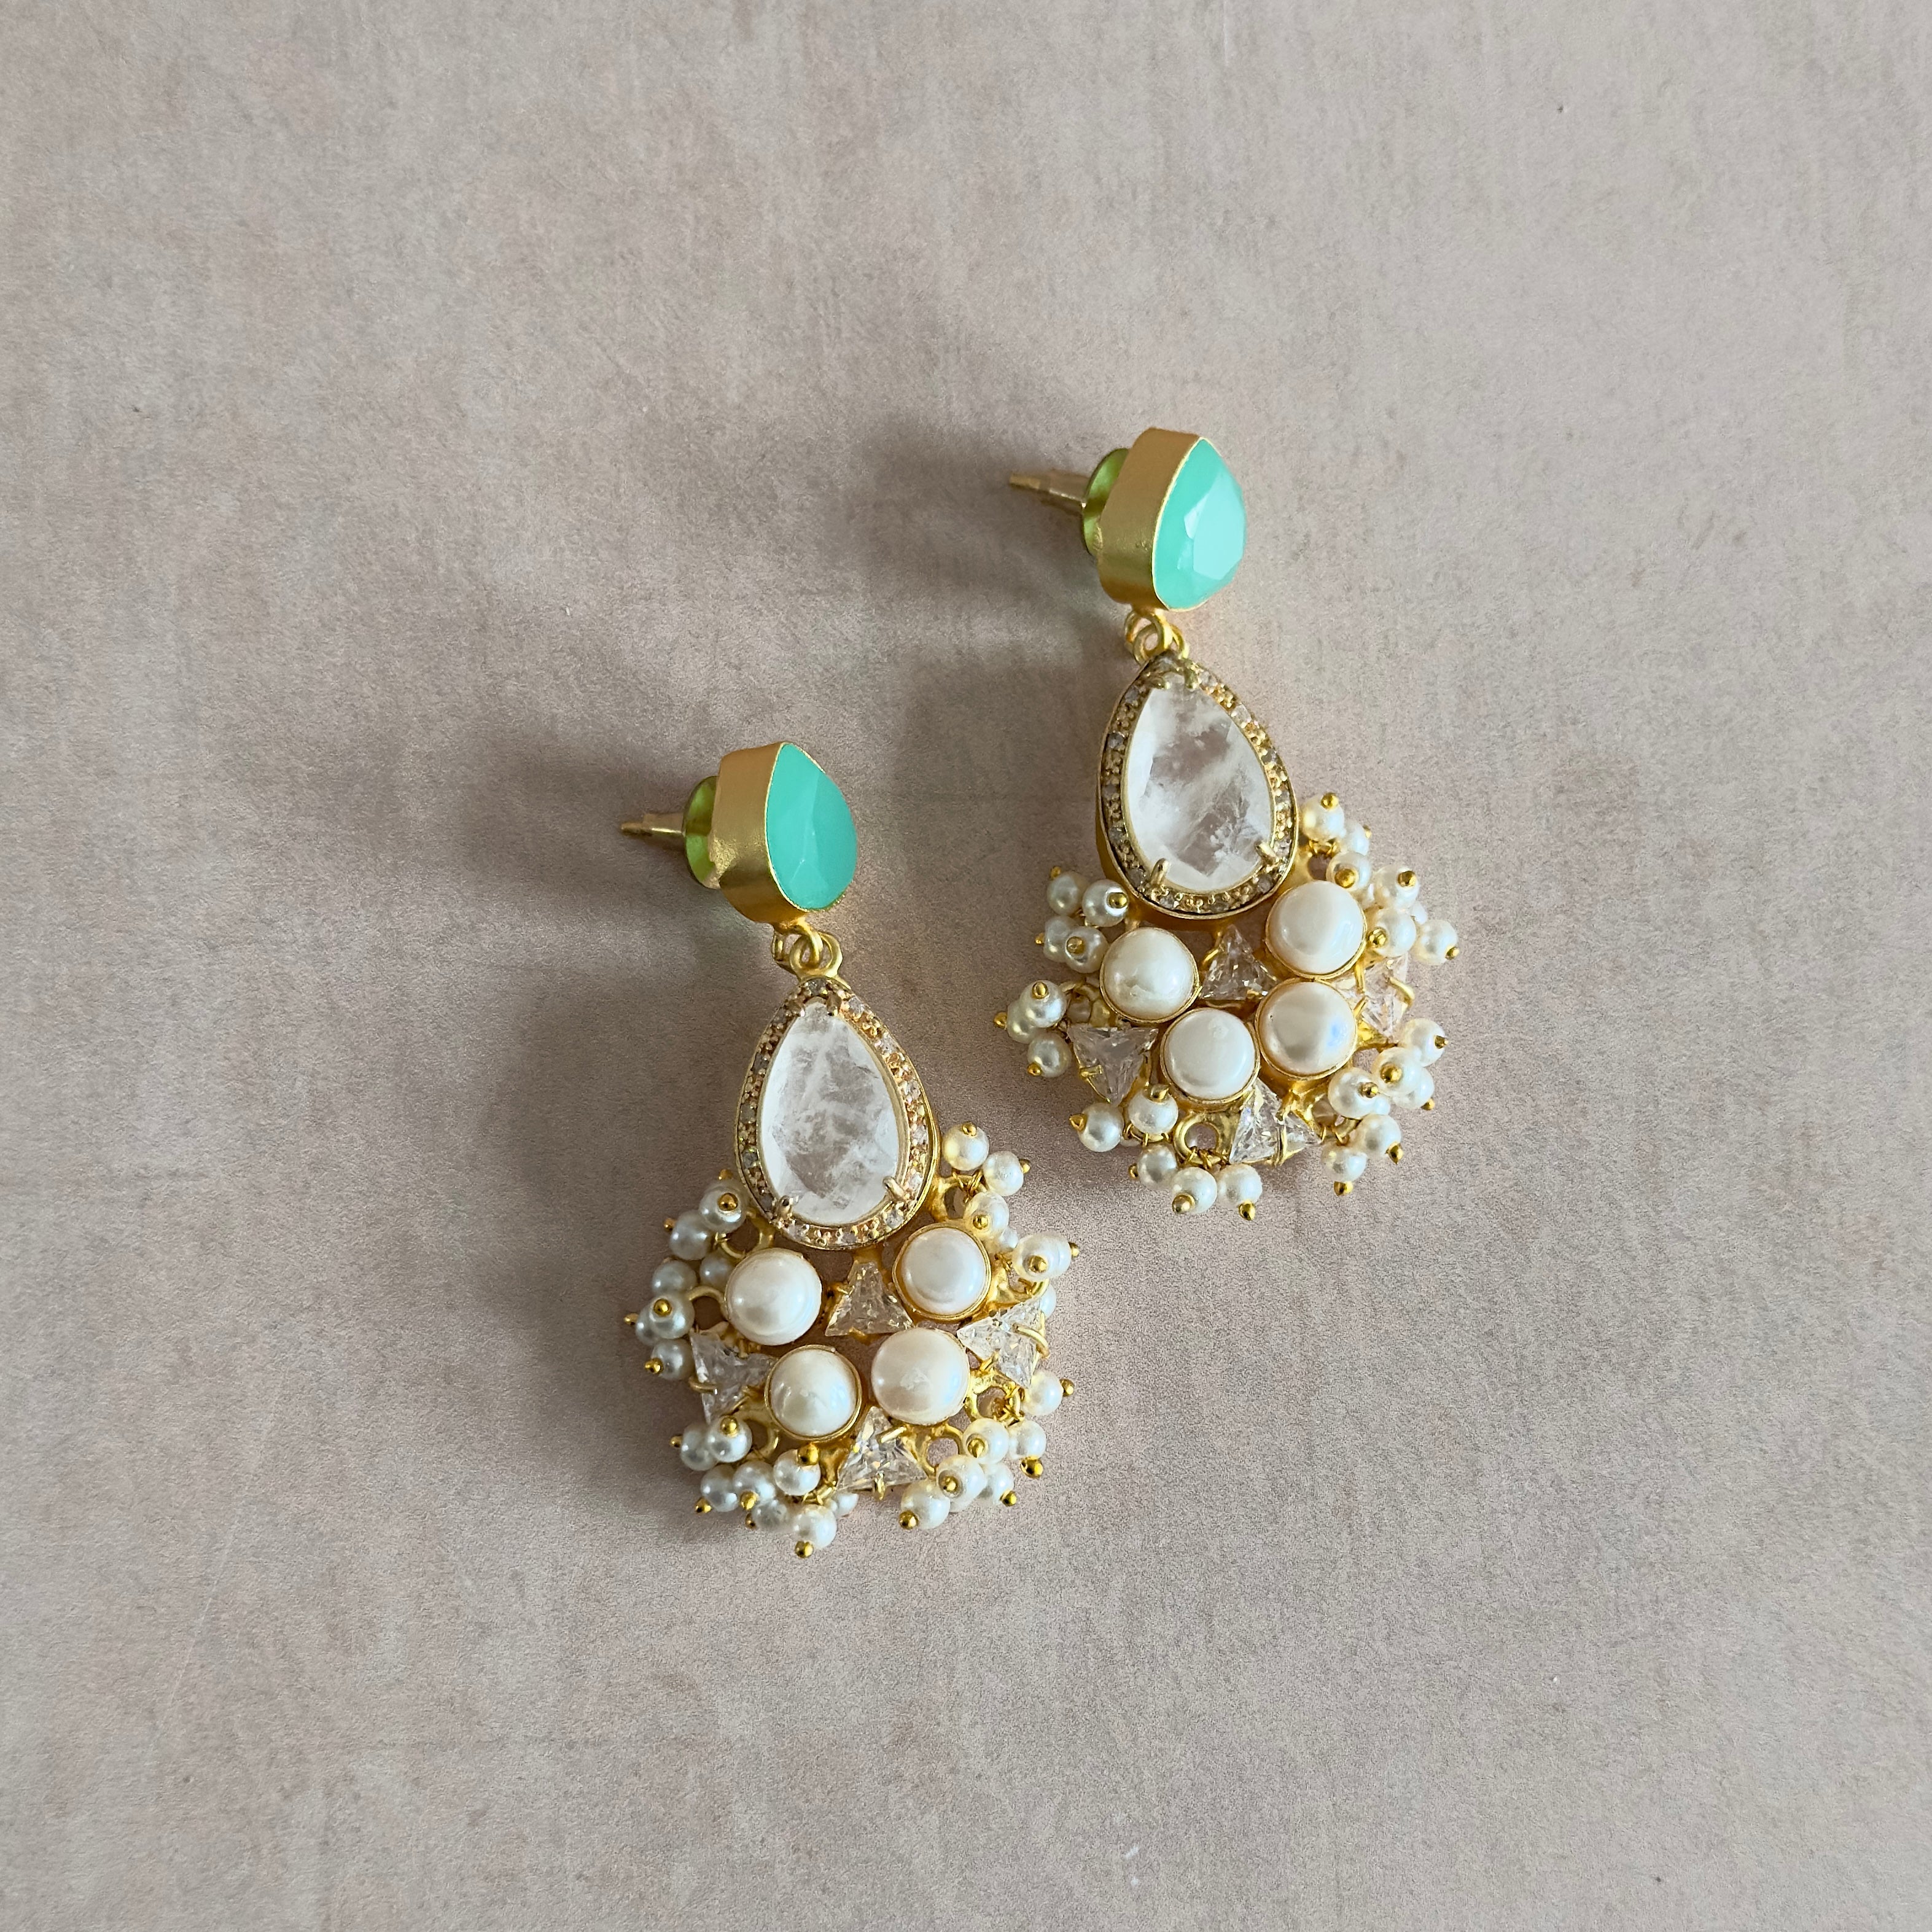 Elevate your style with the Romee Mint Drop Pearl Earrings. Made with stunning white quartz and lustrous freshwater pearls, these earrings add a touch of elegance to any outfit. Perfect for any occasion, these earrings are a must-have for any jewelry collection.